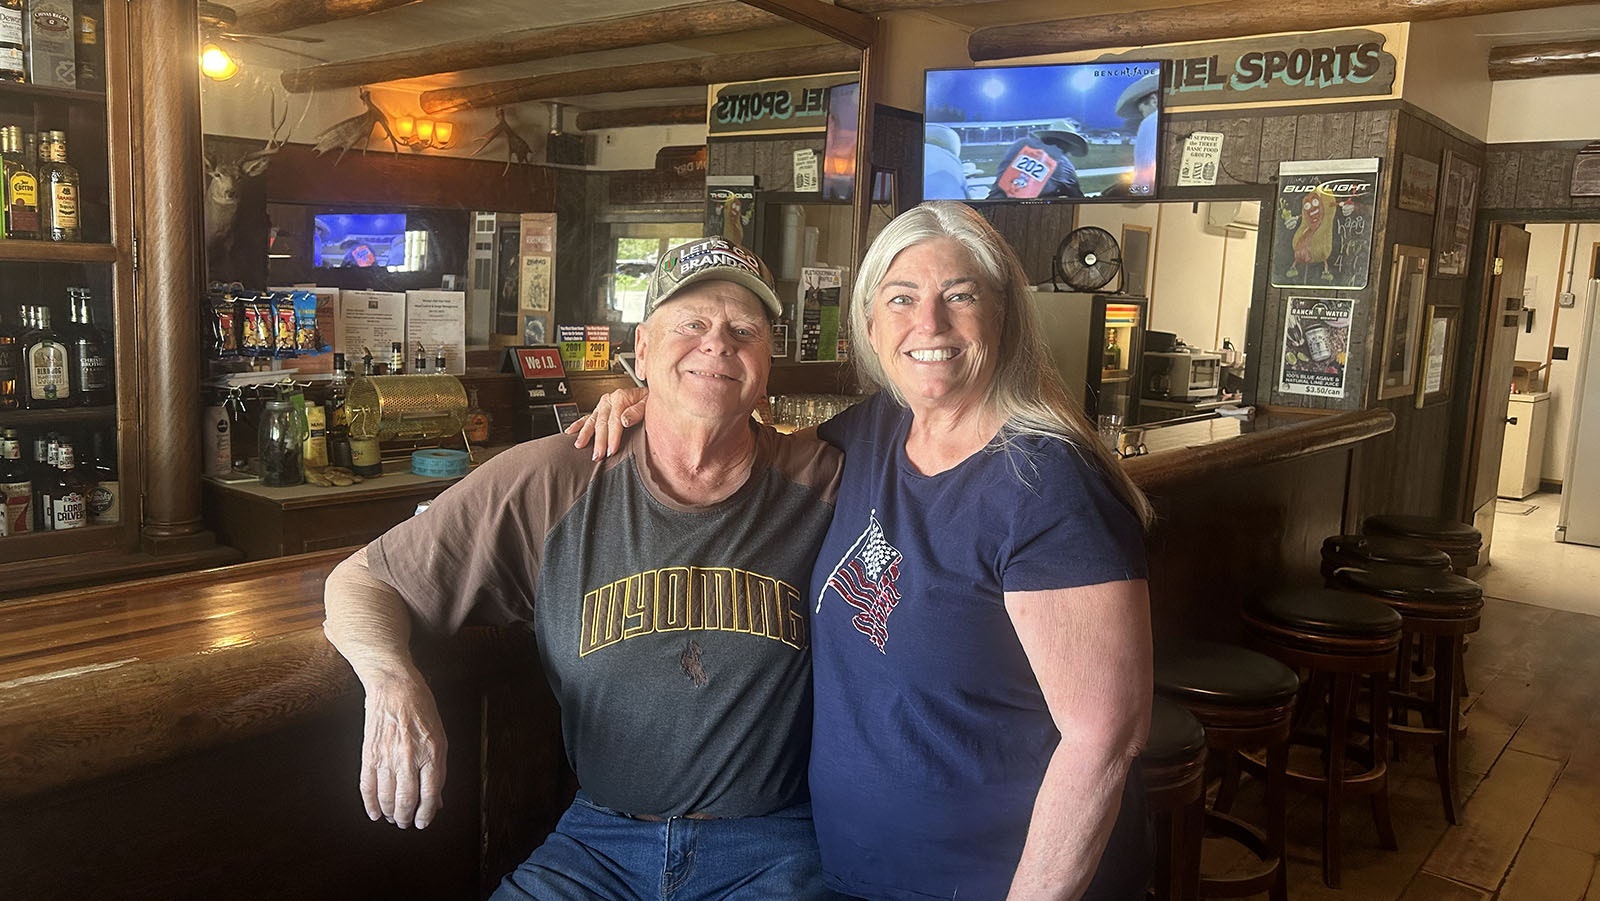 Greg and Cathy Rouse owned the Green River Bar from 1991 to 1999.